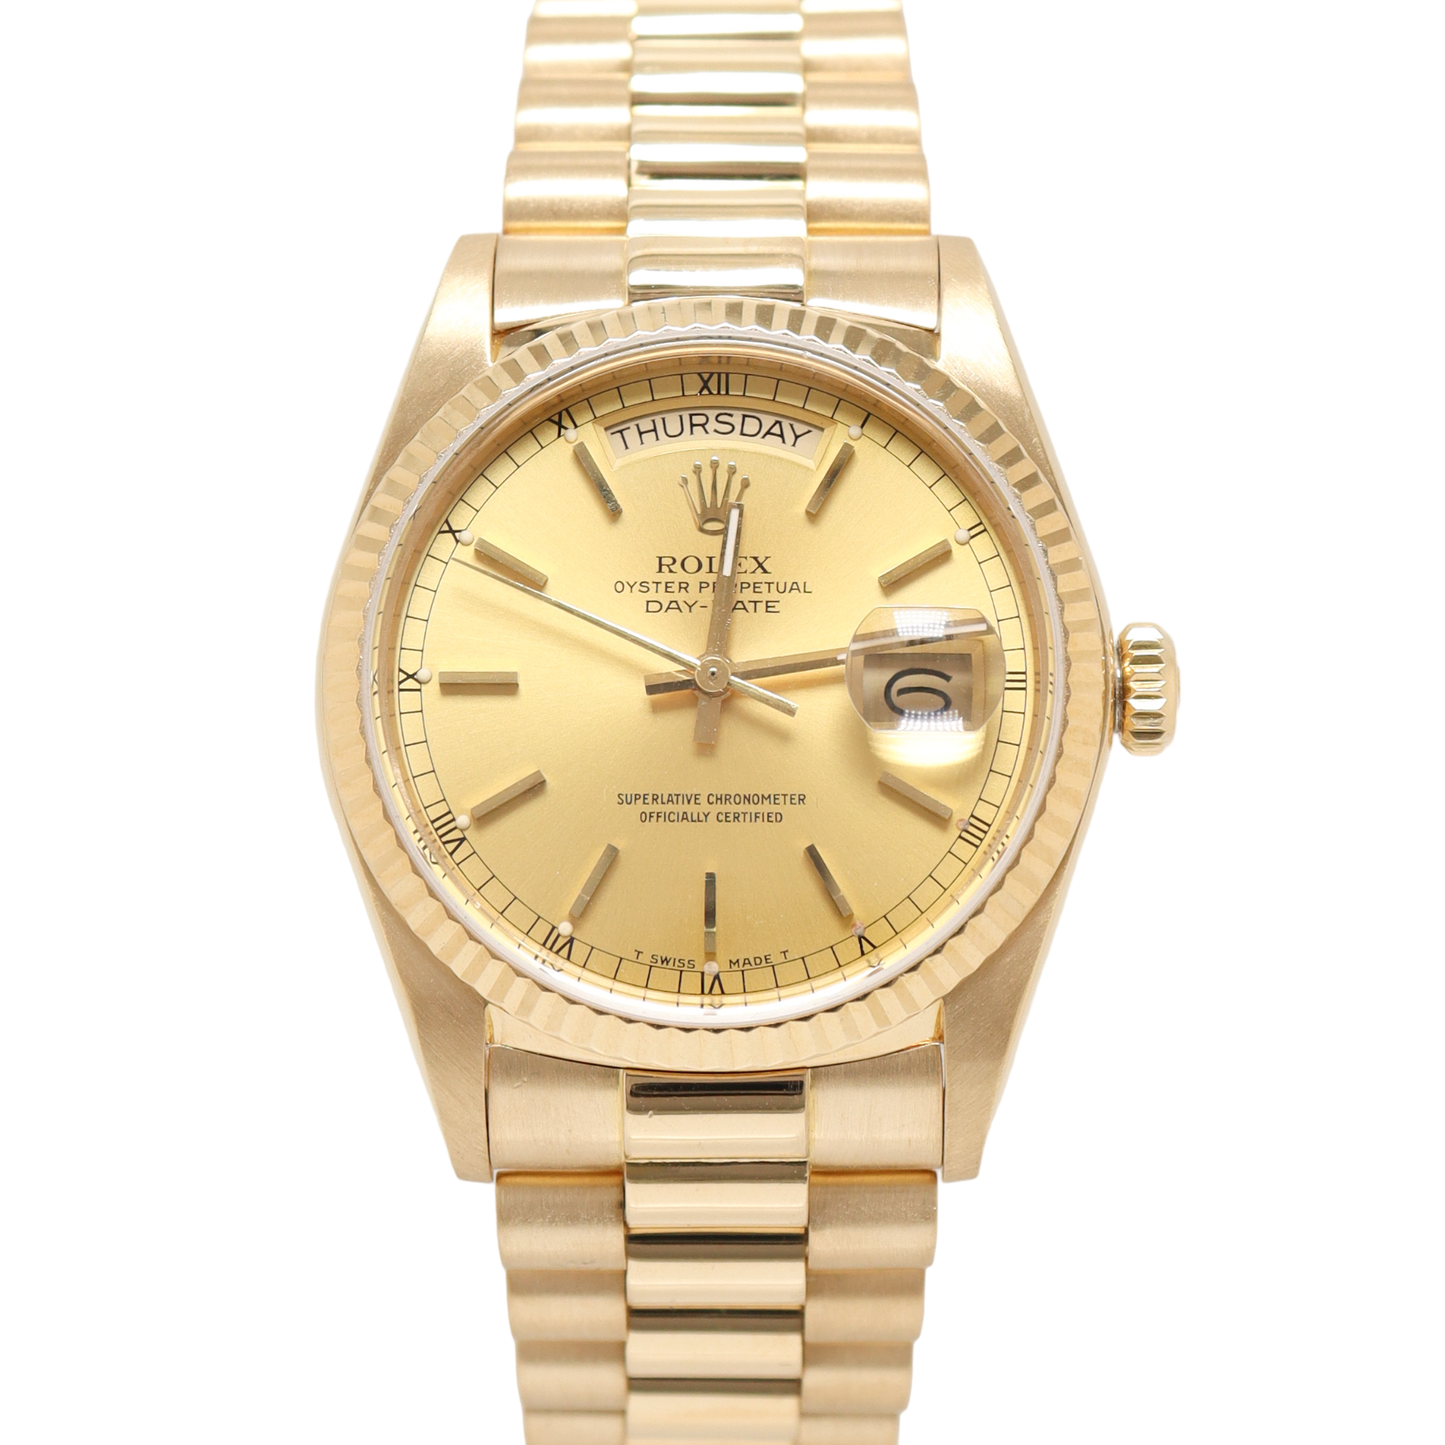 Rolex Day Date 36mm Yellow Gold Champagne Dial Watch Reference# 18038 - Happy Jewelers Fine Jewelry Lifetime Warranty